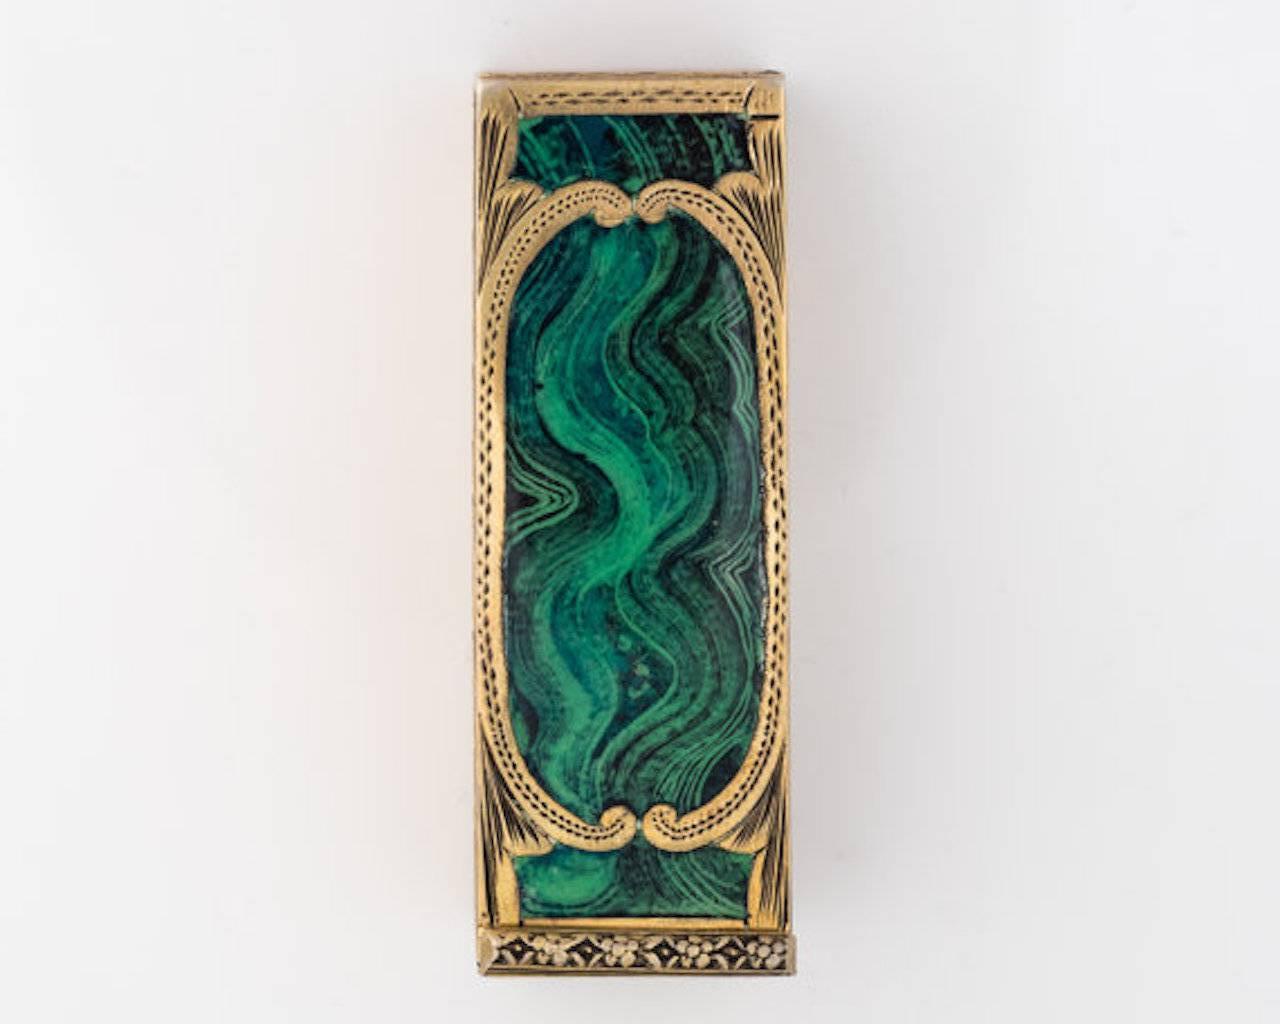 1940s Lipstick Case features a Mirror, crafted in Malachite and Sterling Silver.

This Ornate hand-etched piece has a lovely matte malachite finish on the top of the case. The malachite is a bright green hue swirled with darker shades of green. And